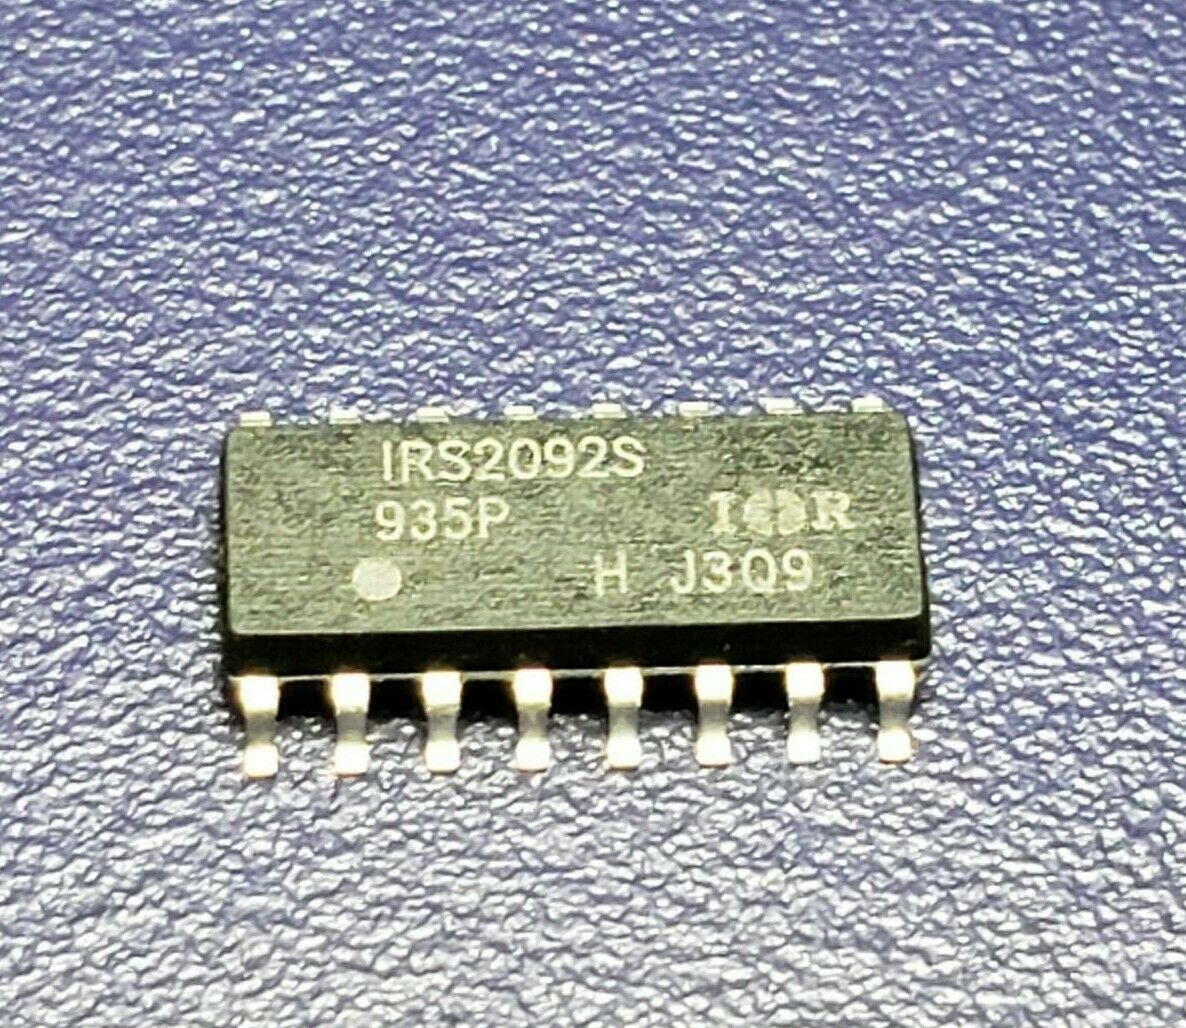 Irs2092s Ic Driver Mosfet Digital Amplifier Usa Stock